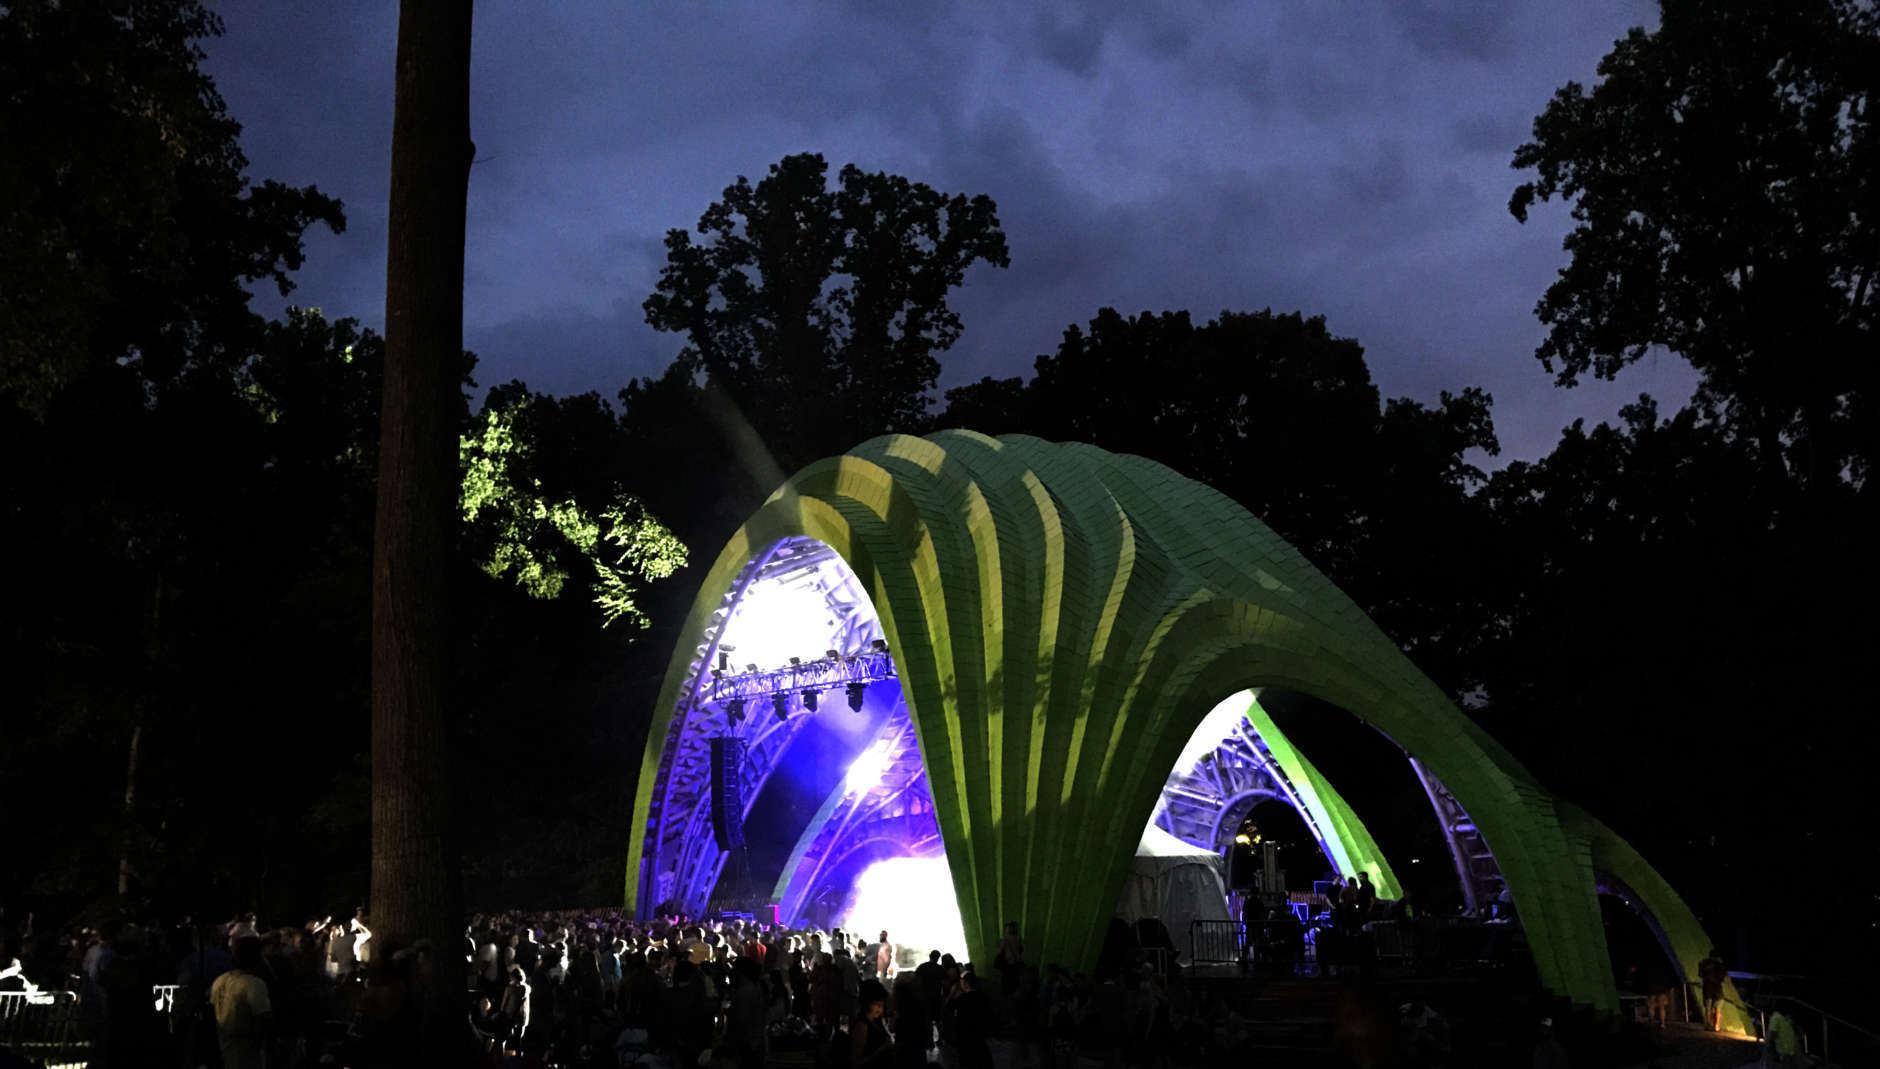 Merriweather Park's new Chrysalis stage shows there is potential for the park's cultural programming to diversify, said OPUS 1 curator and producer Ken Farmer. (Courtesy Howard Hughes Corp.)